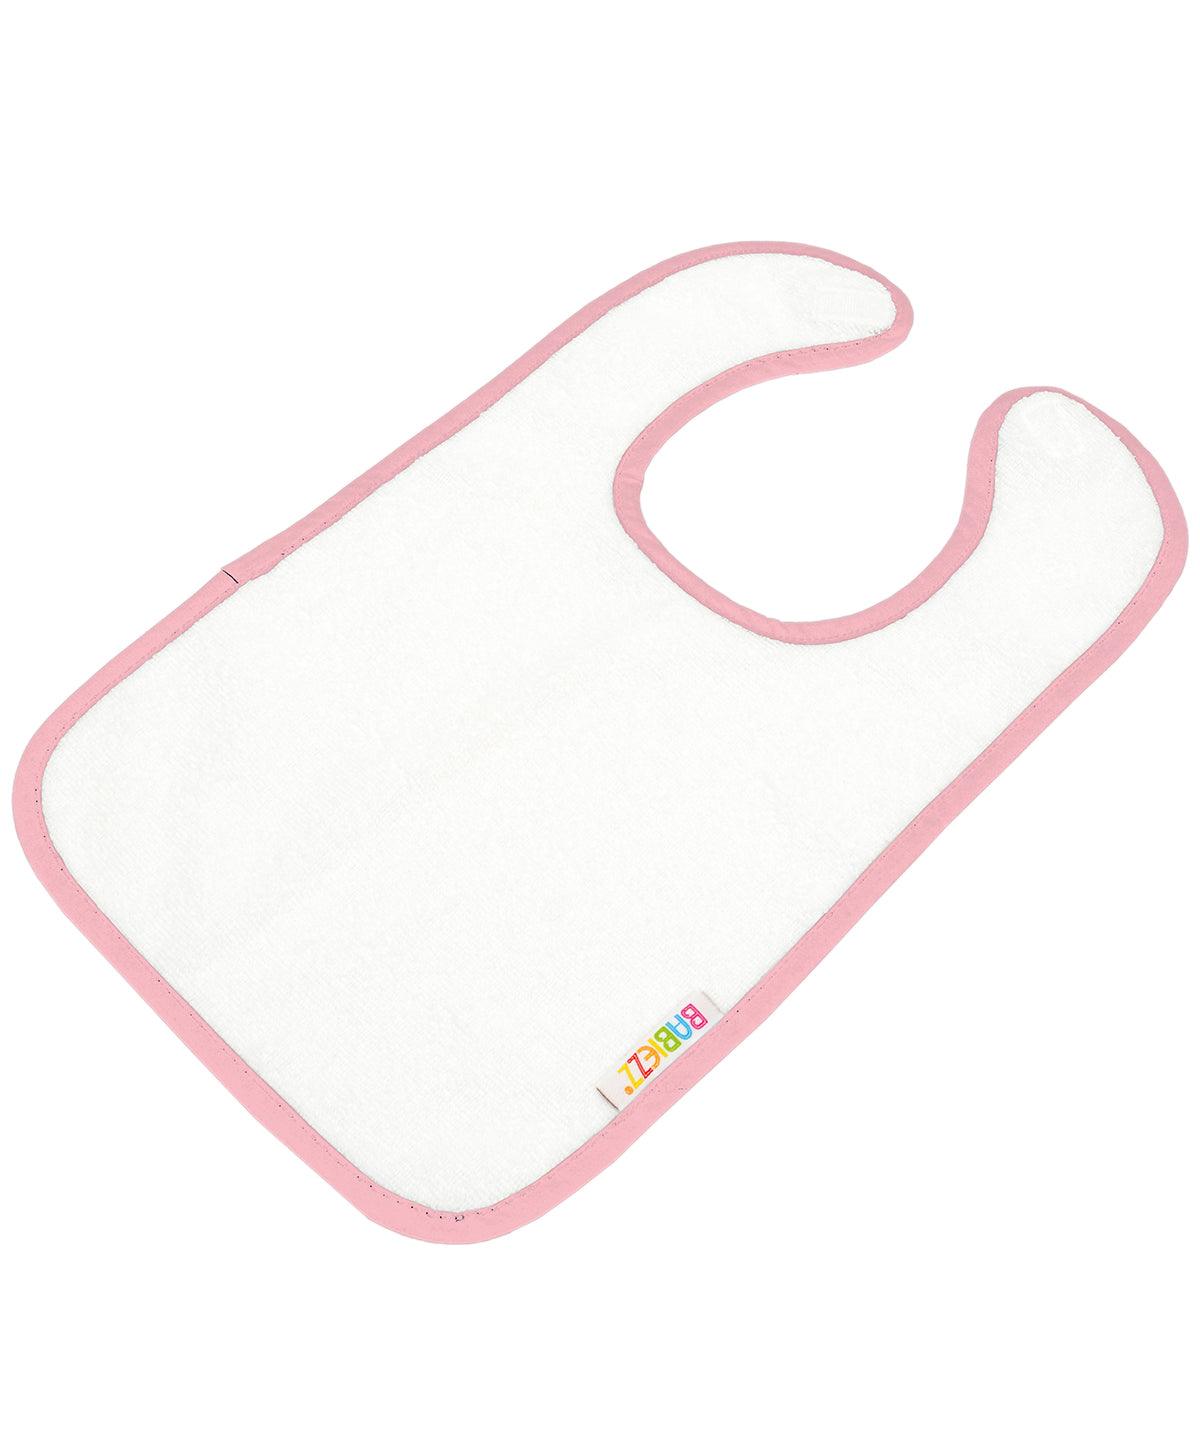 White/Light Pink - ARTG® Babiezz® all-over sublimation baby bib Bibs A&R Towels Baby & Toddler, Homewares & Towelling, Sublimation Schoolwear Centres